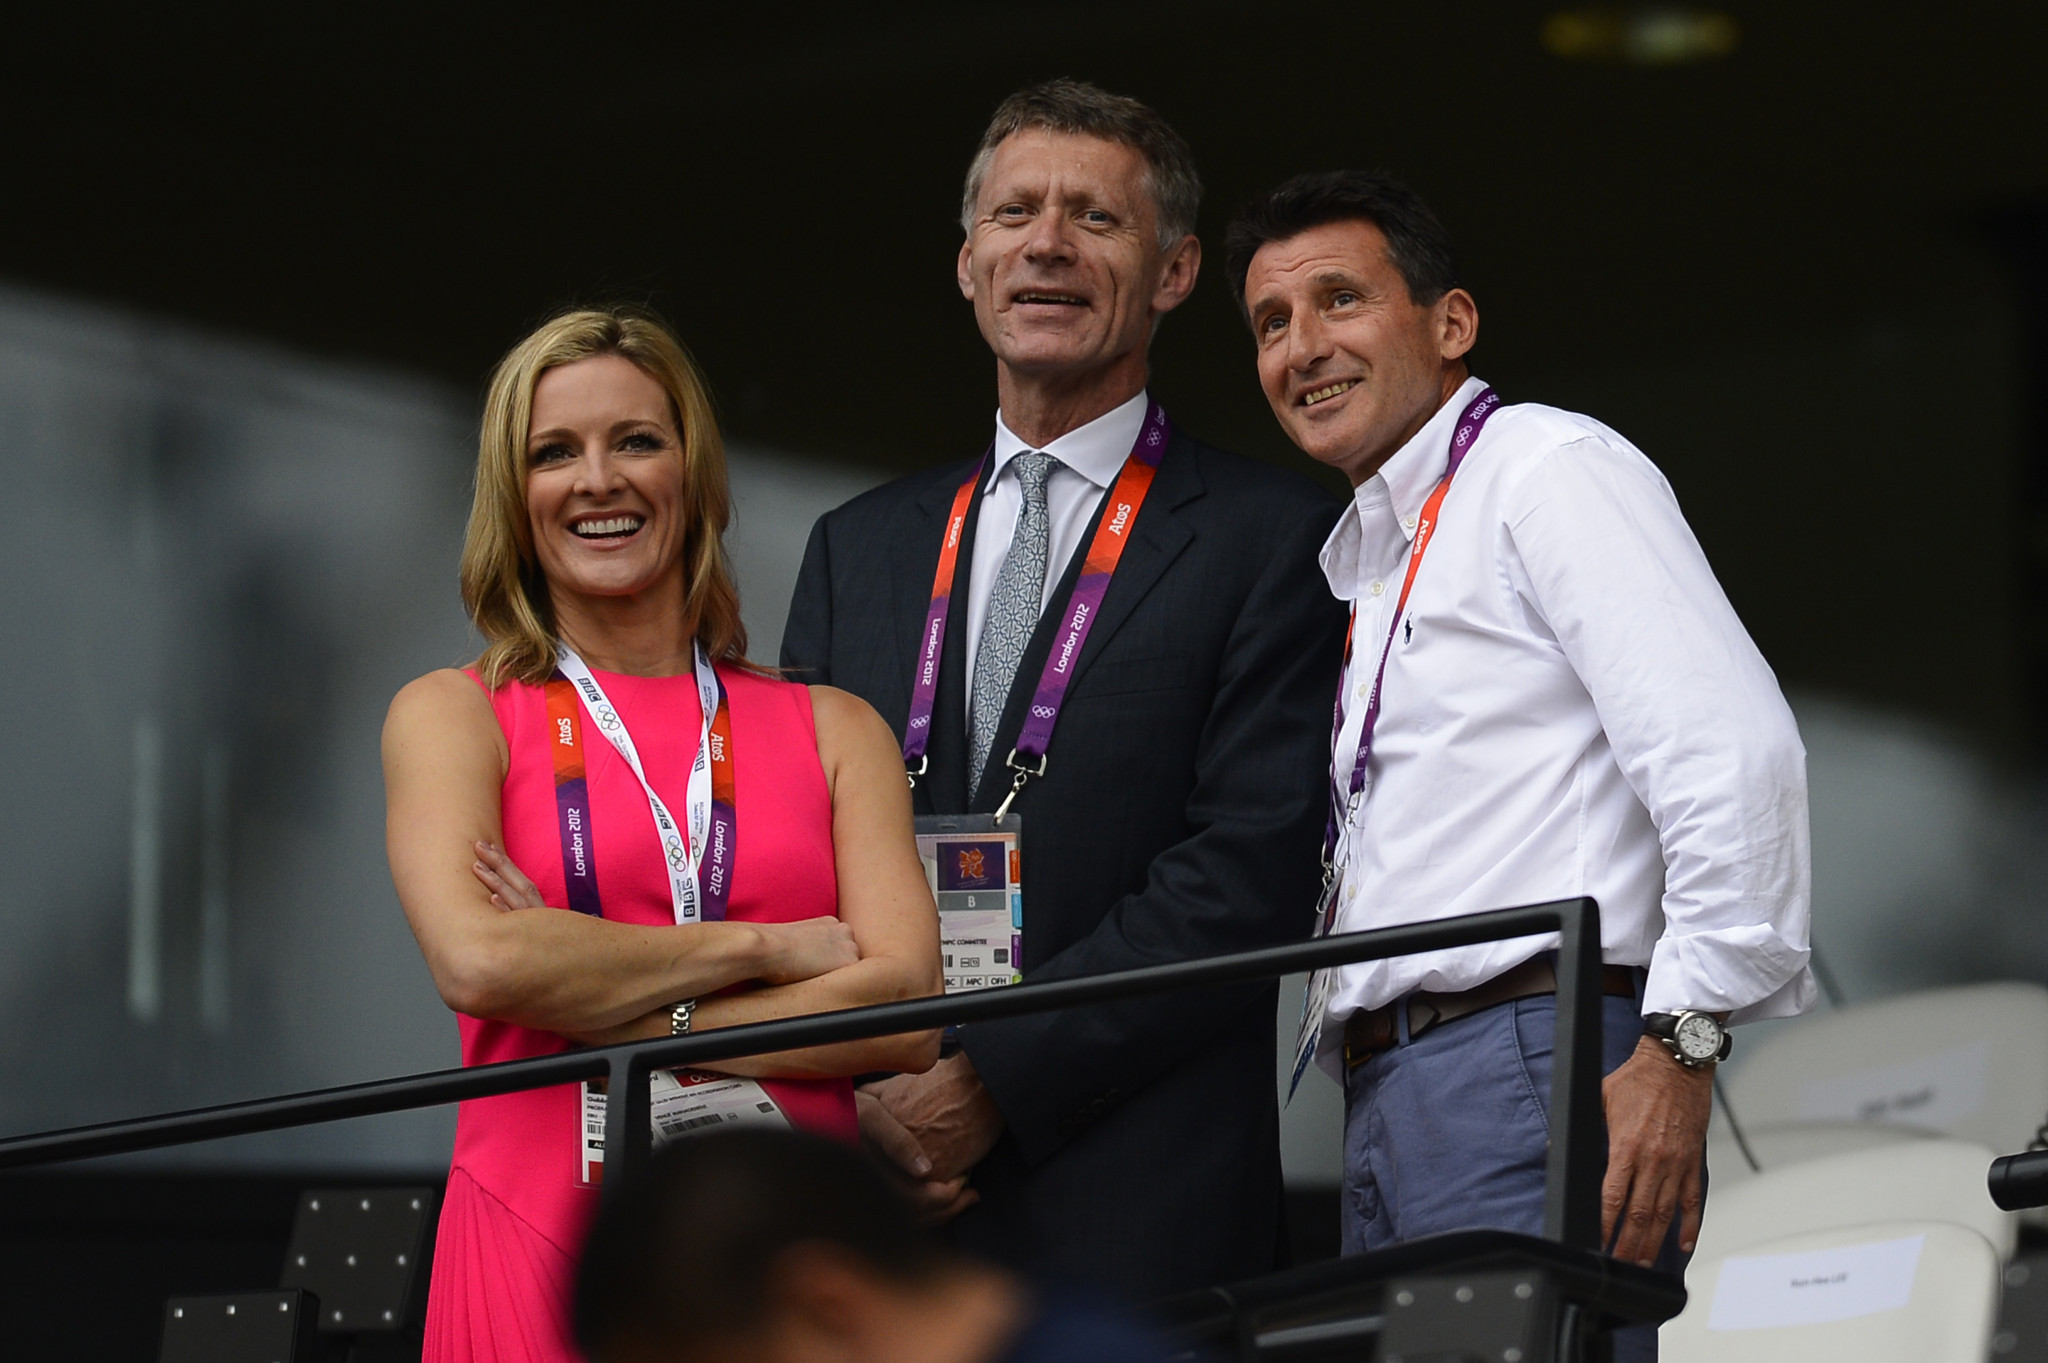 Anthony Edgar, pictured here with British television presenter Gabby Logan and London 2012 chairman Sebastian Coe, was responsible for managing the delivery of media facilities and services at Olympic Games ©Getty Images